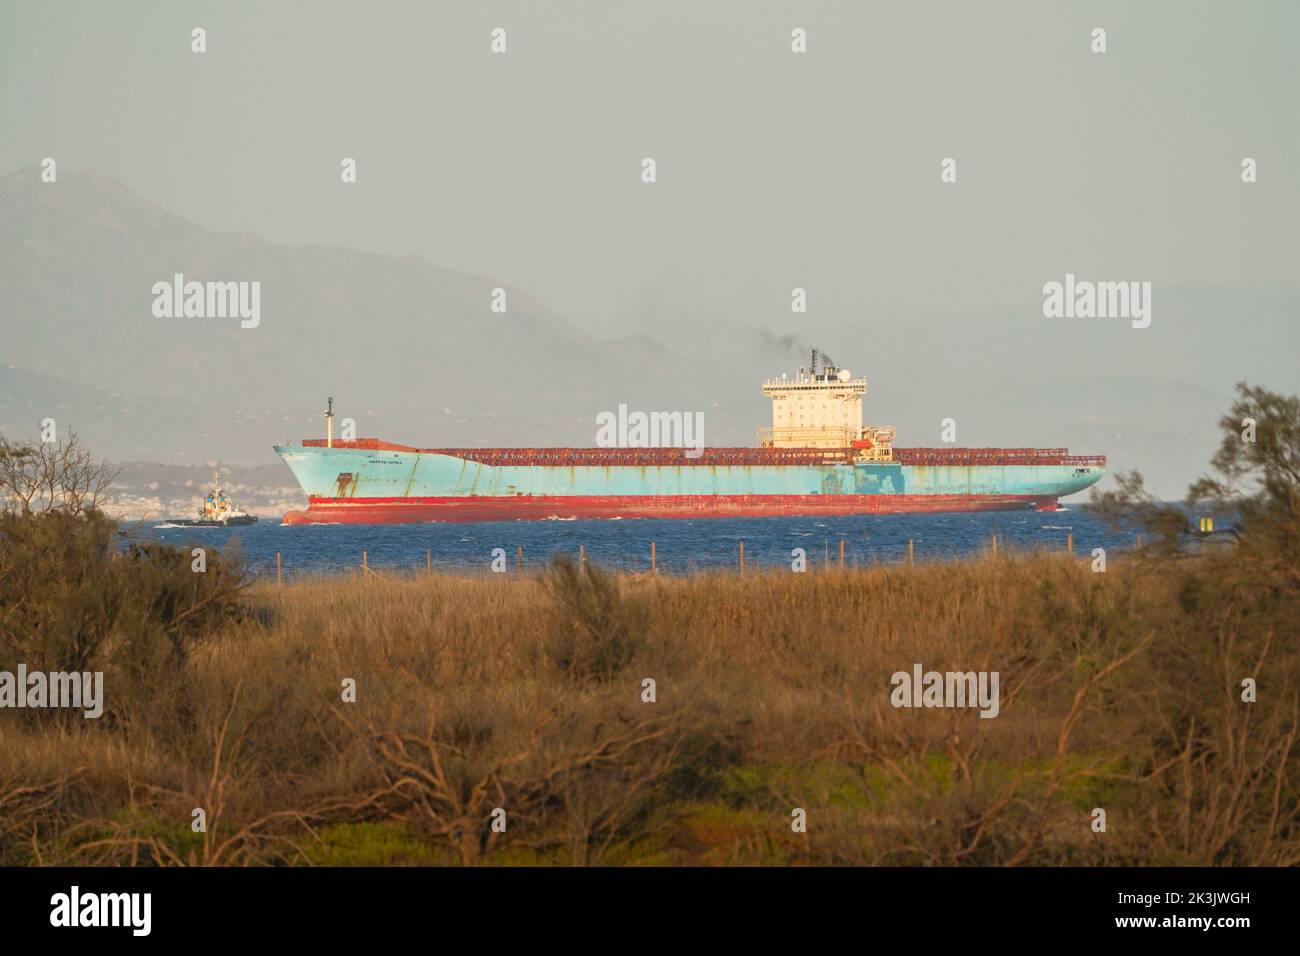 Container ship MAERSK KOTKA, near Malaga, with Guadalhorce natural park in front, Andalucia, Spain. Stock Photo